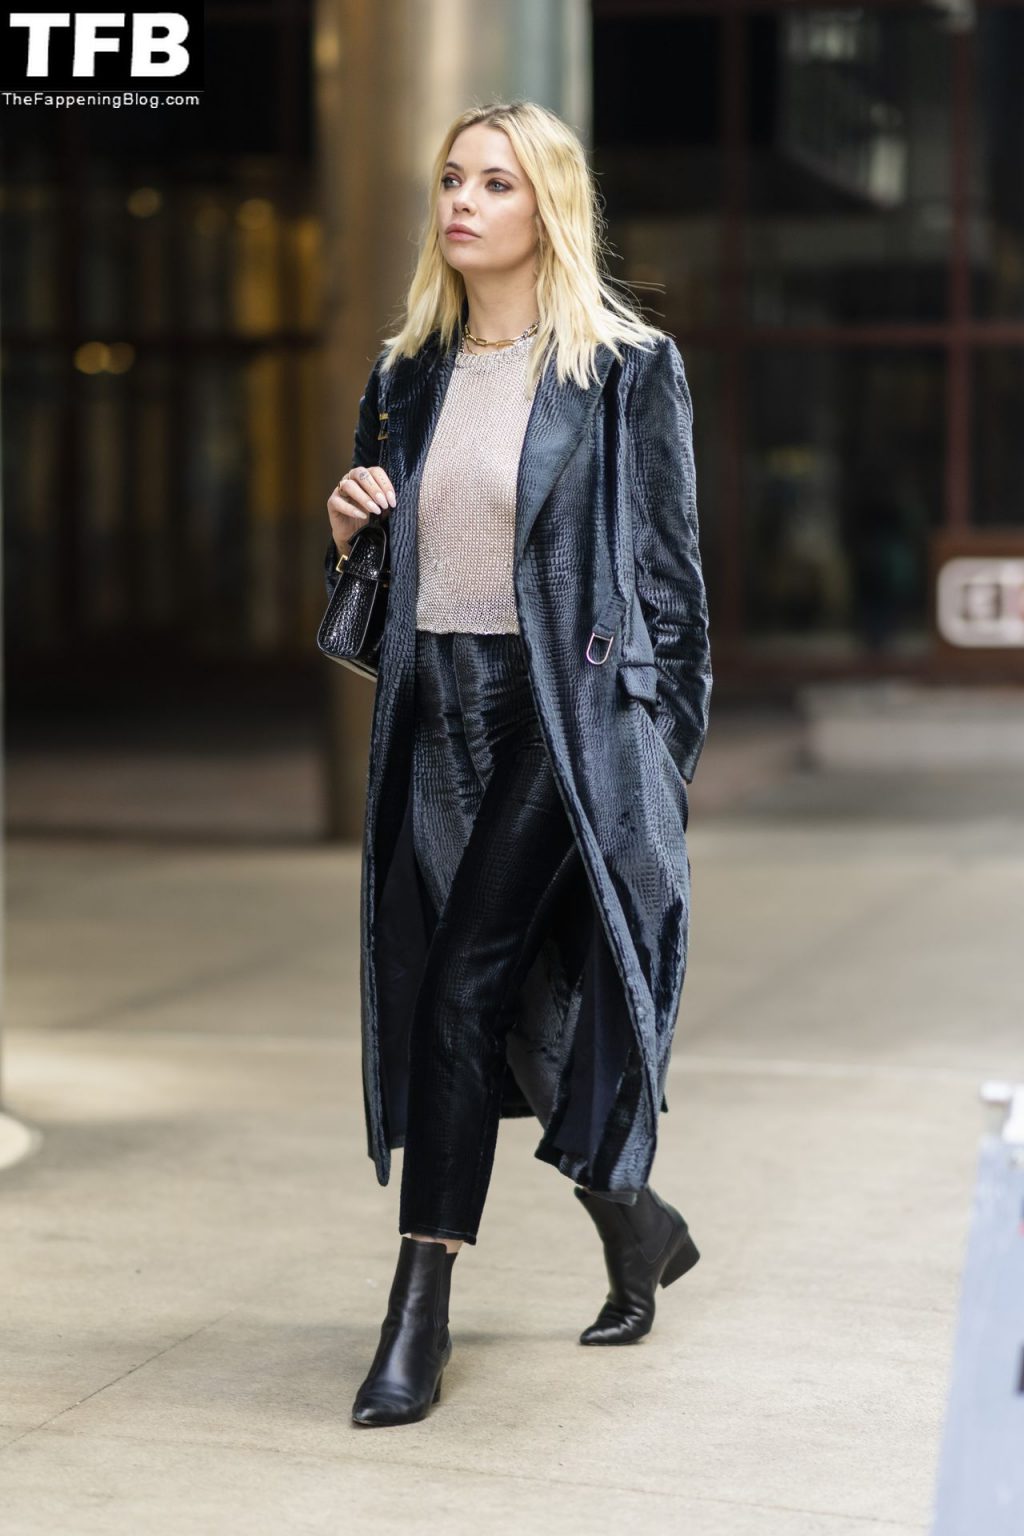 Ashley Benson Sexy The Fappening Blog 13 1024x1536 - Braless Ashley Benson Looks Stylish While Heading to a Meeting in NYC (20 Photos)